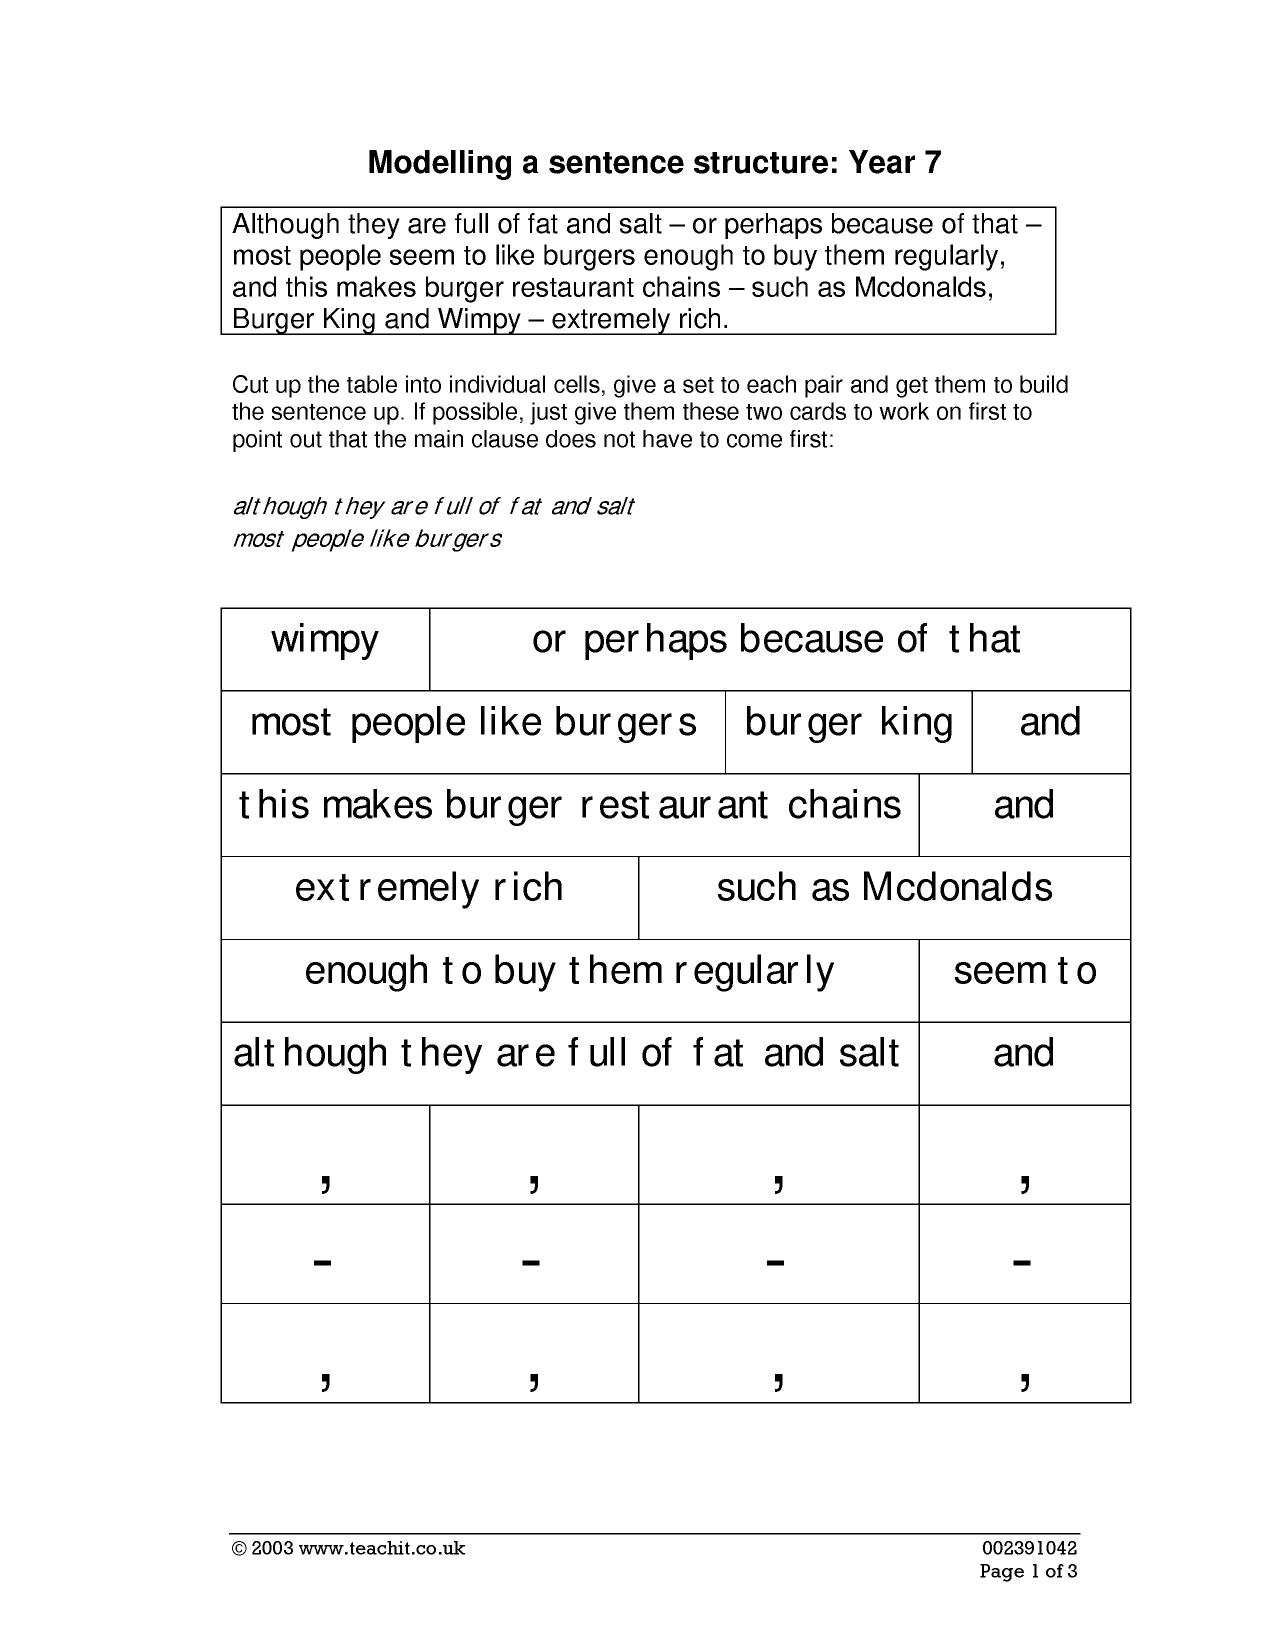 sentence-construction-ks3-grammar-and-vocabulary-key-stage-3-resources